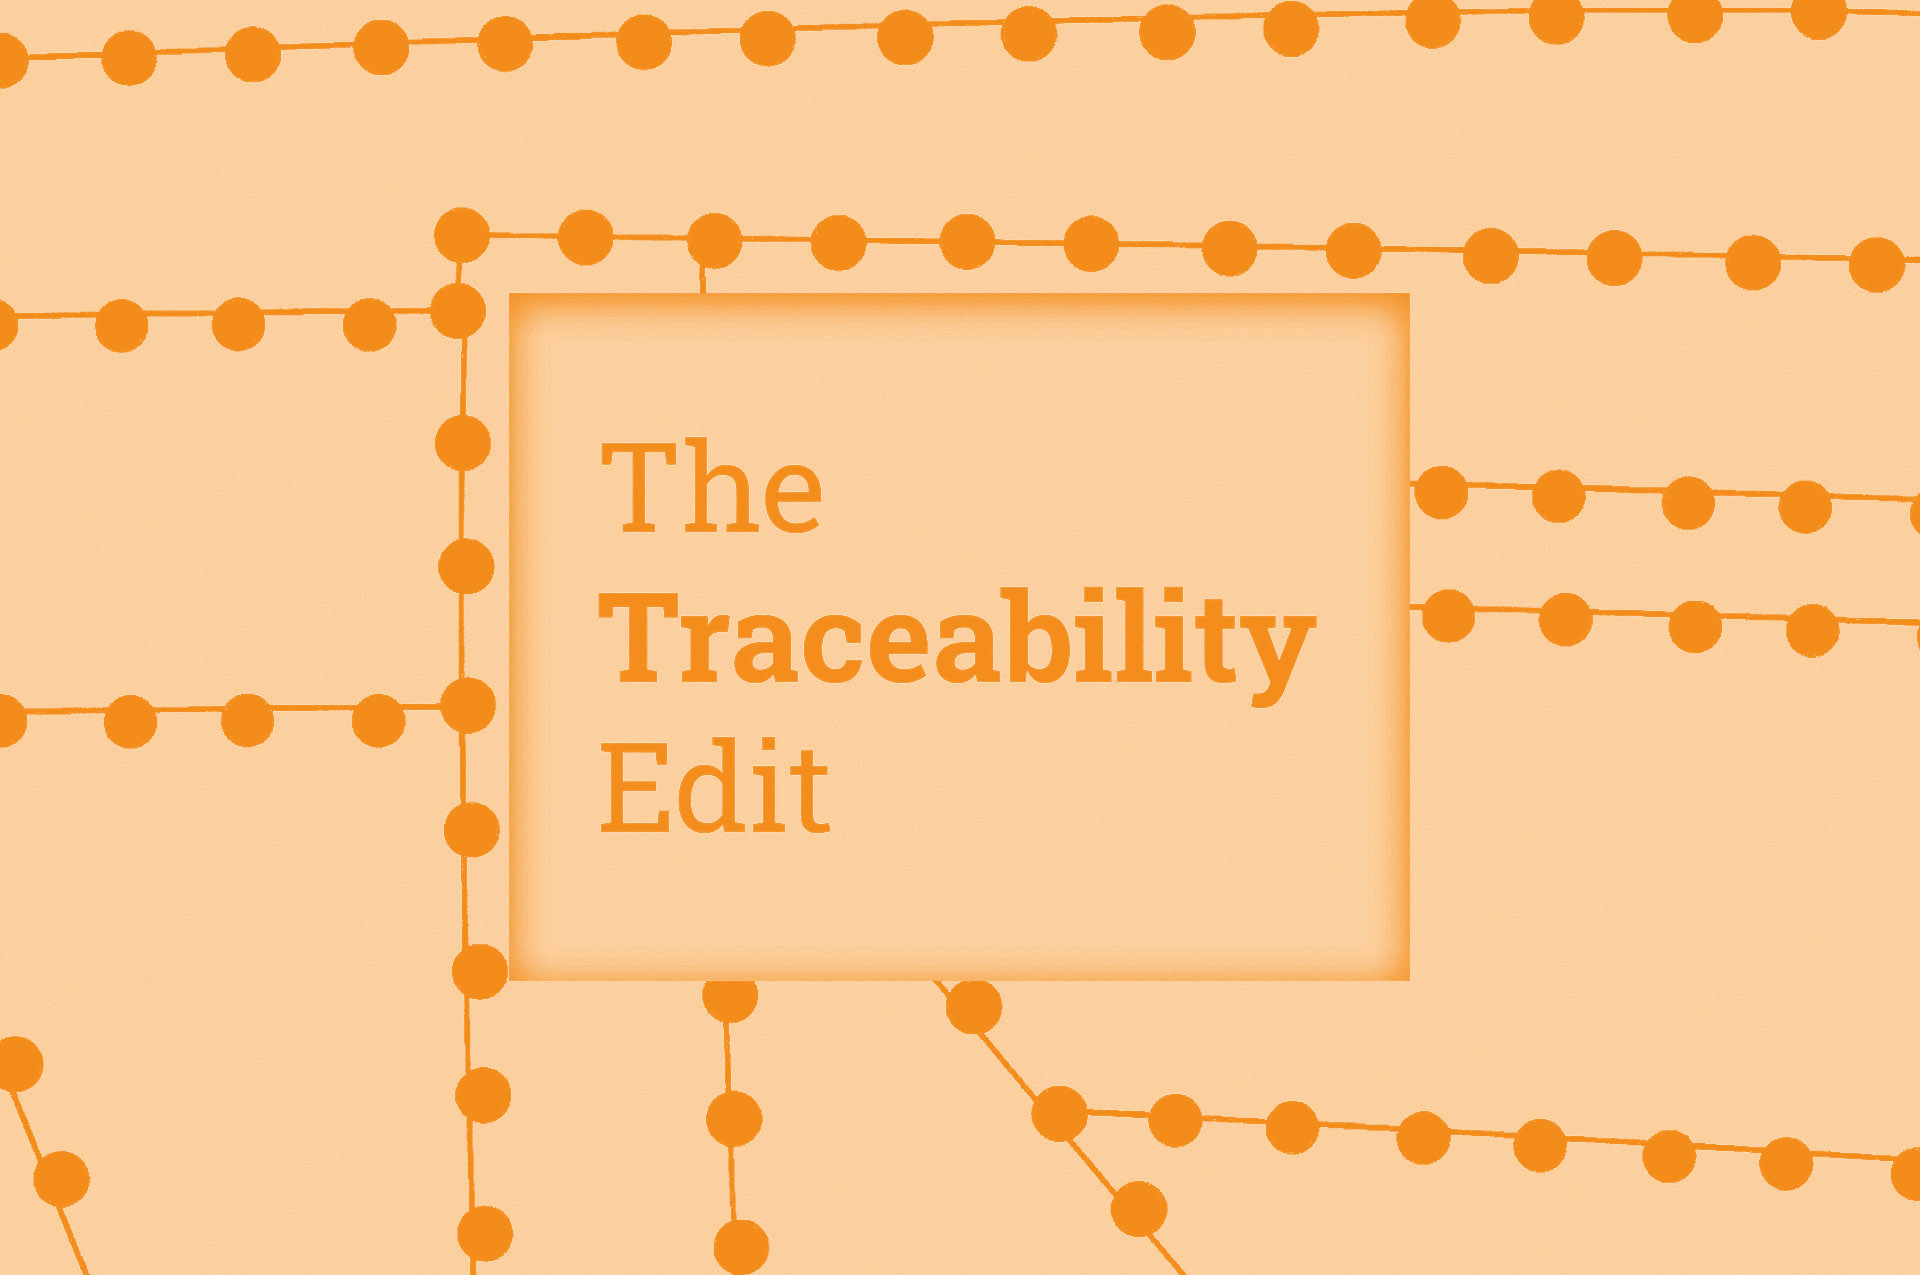 Traceability News to Read from April